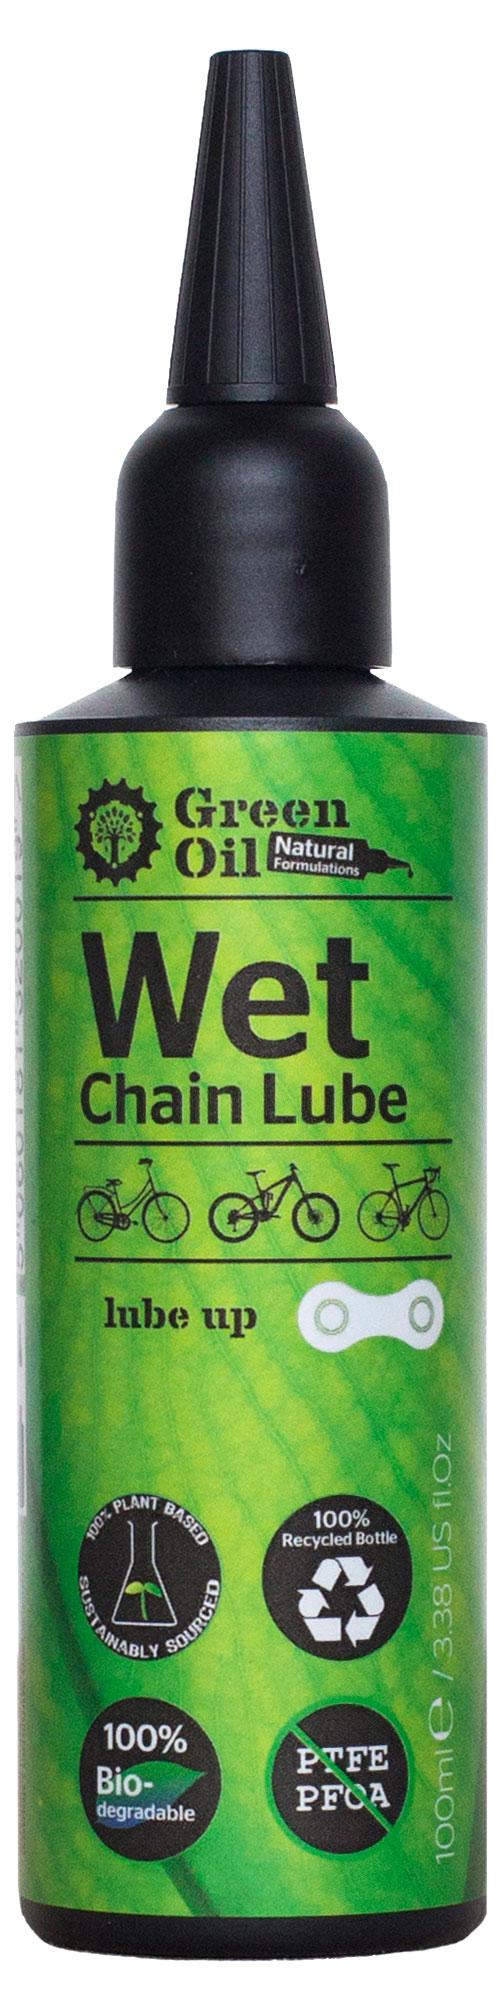 Green Oil Ecological Chain Lube 100ml - Transparent